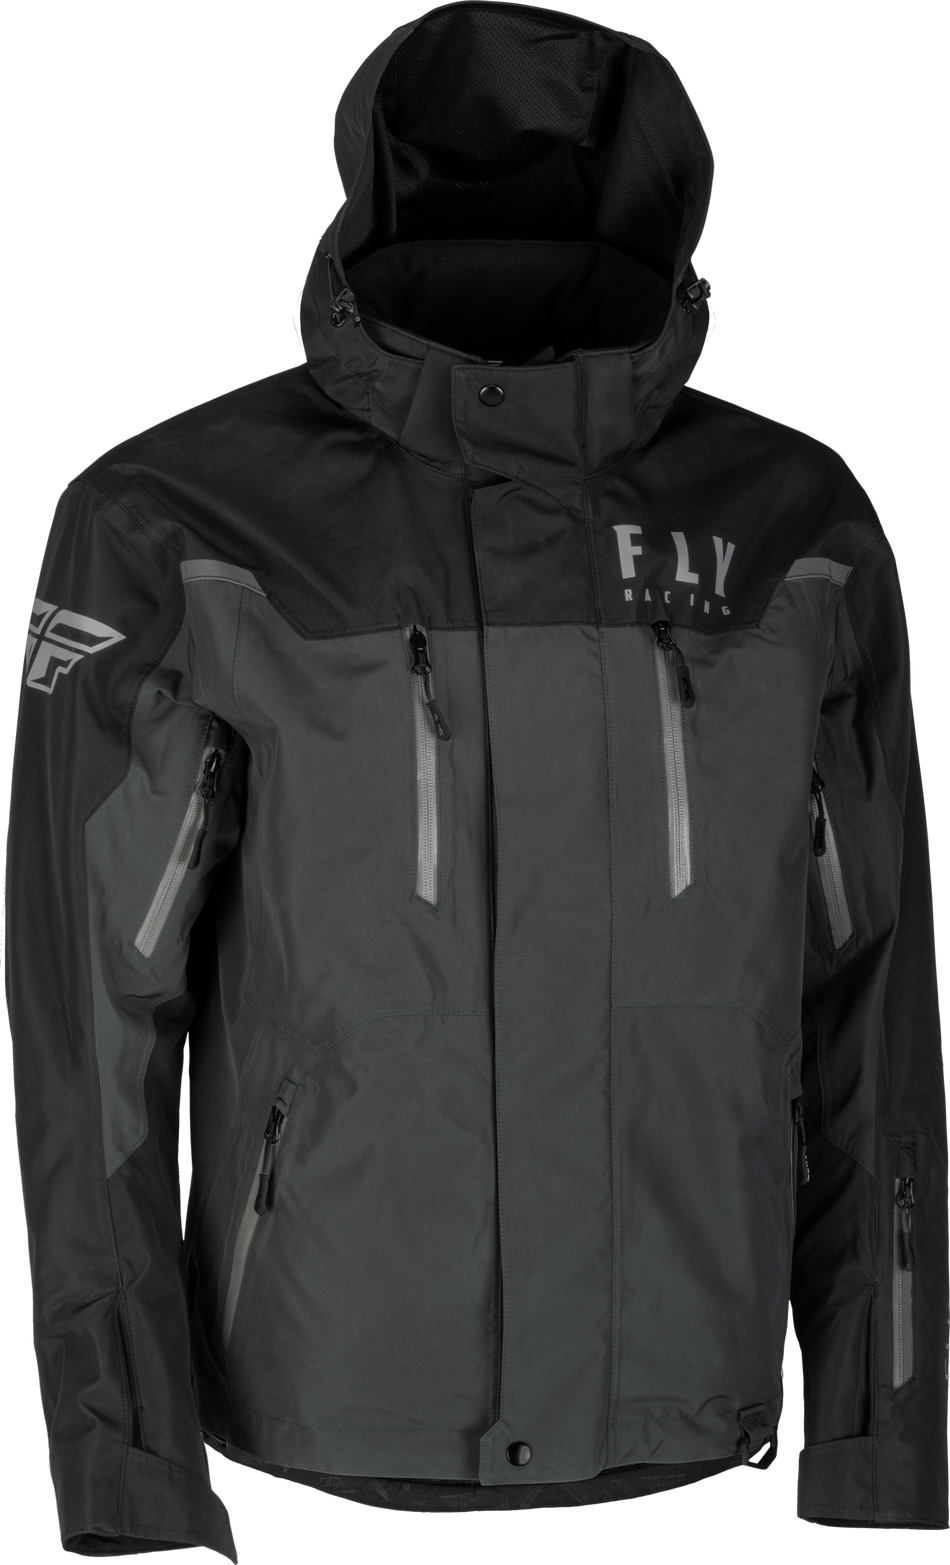 FLY RACING Incline Jacket Black/Charcoal 3x 470-41033X